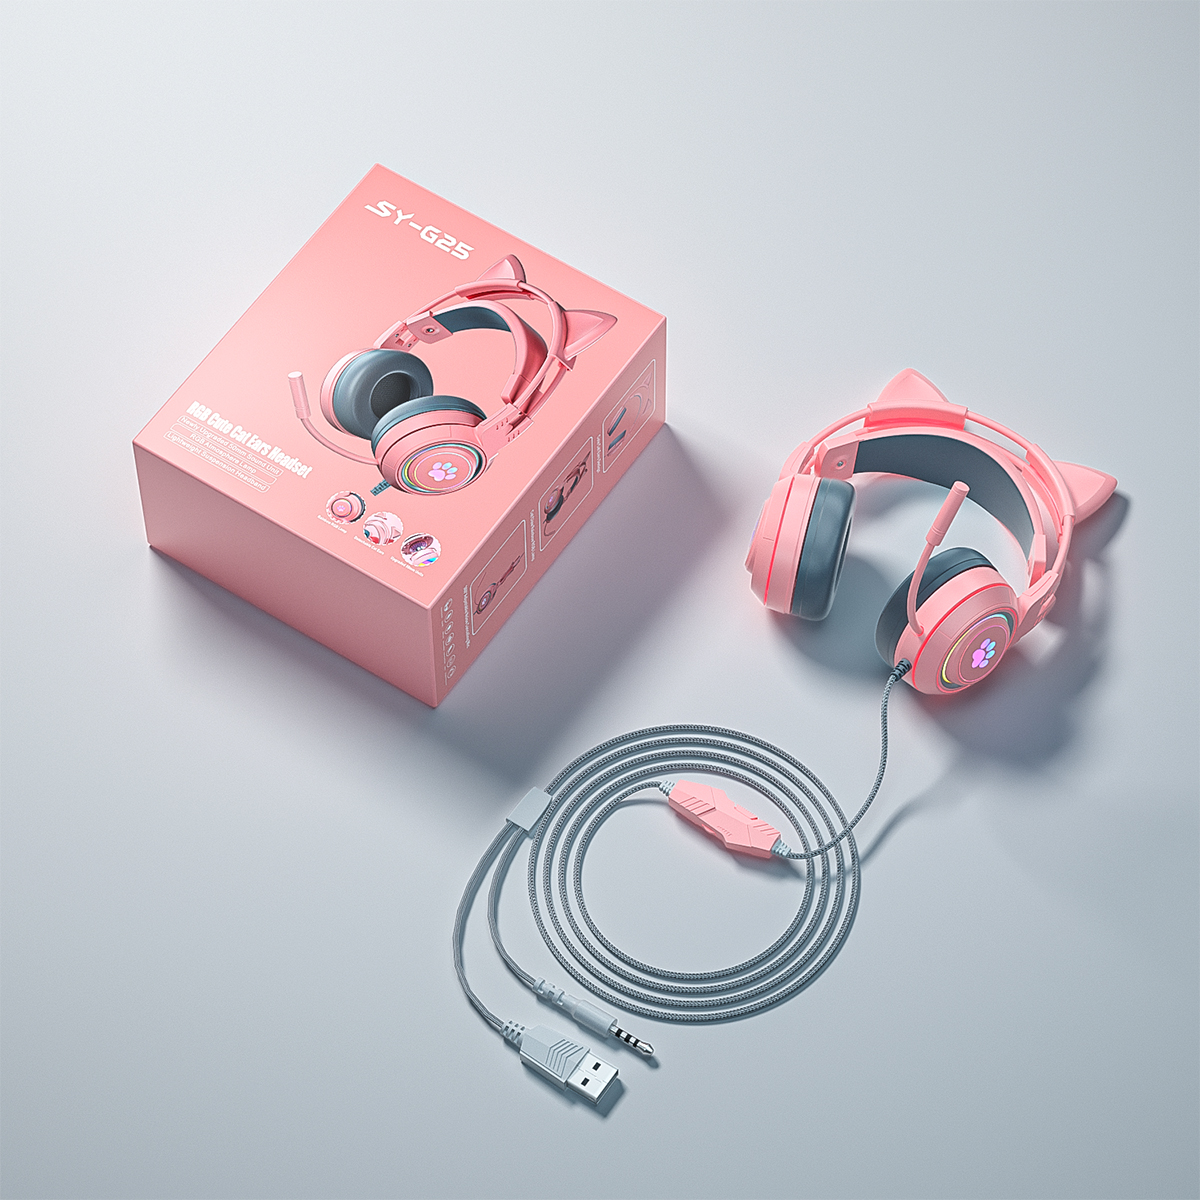 G25-Gaming-Headphone-35mm-USB-Wired-Headset-50mm-Large-Drivers-Colorful-Light-Cute-Headset-with-Mic-1970122-11